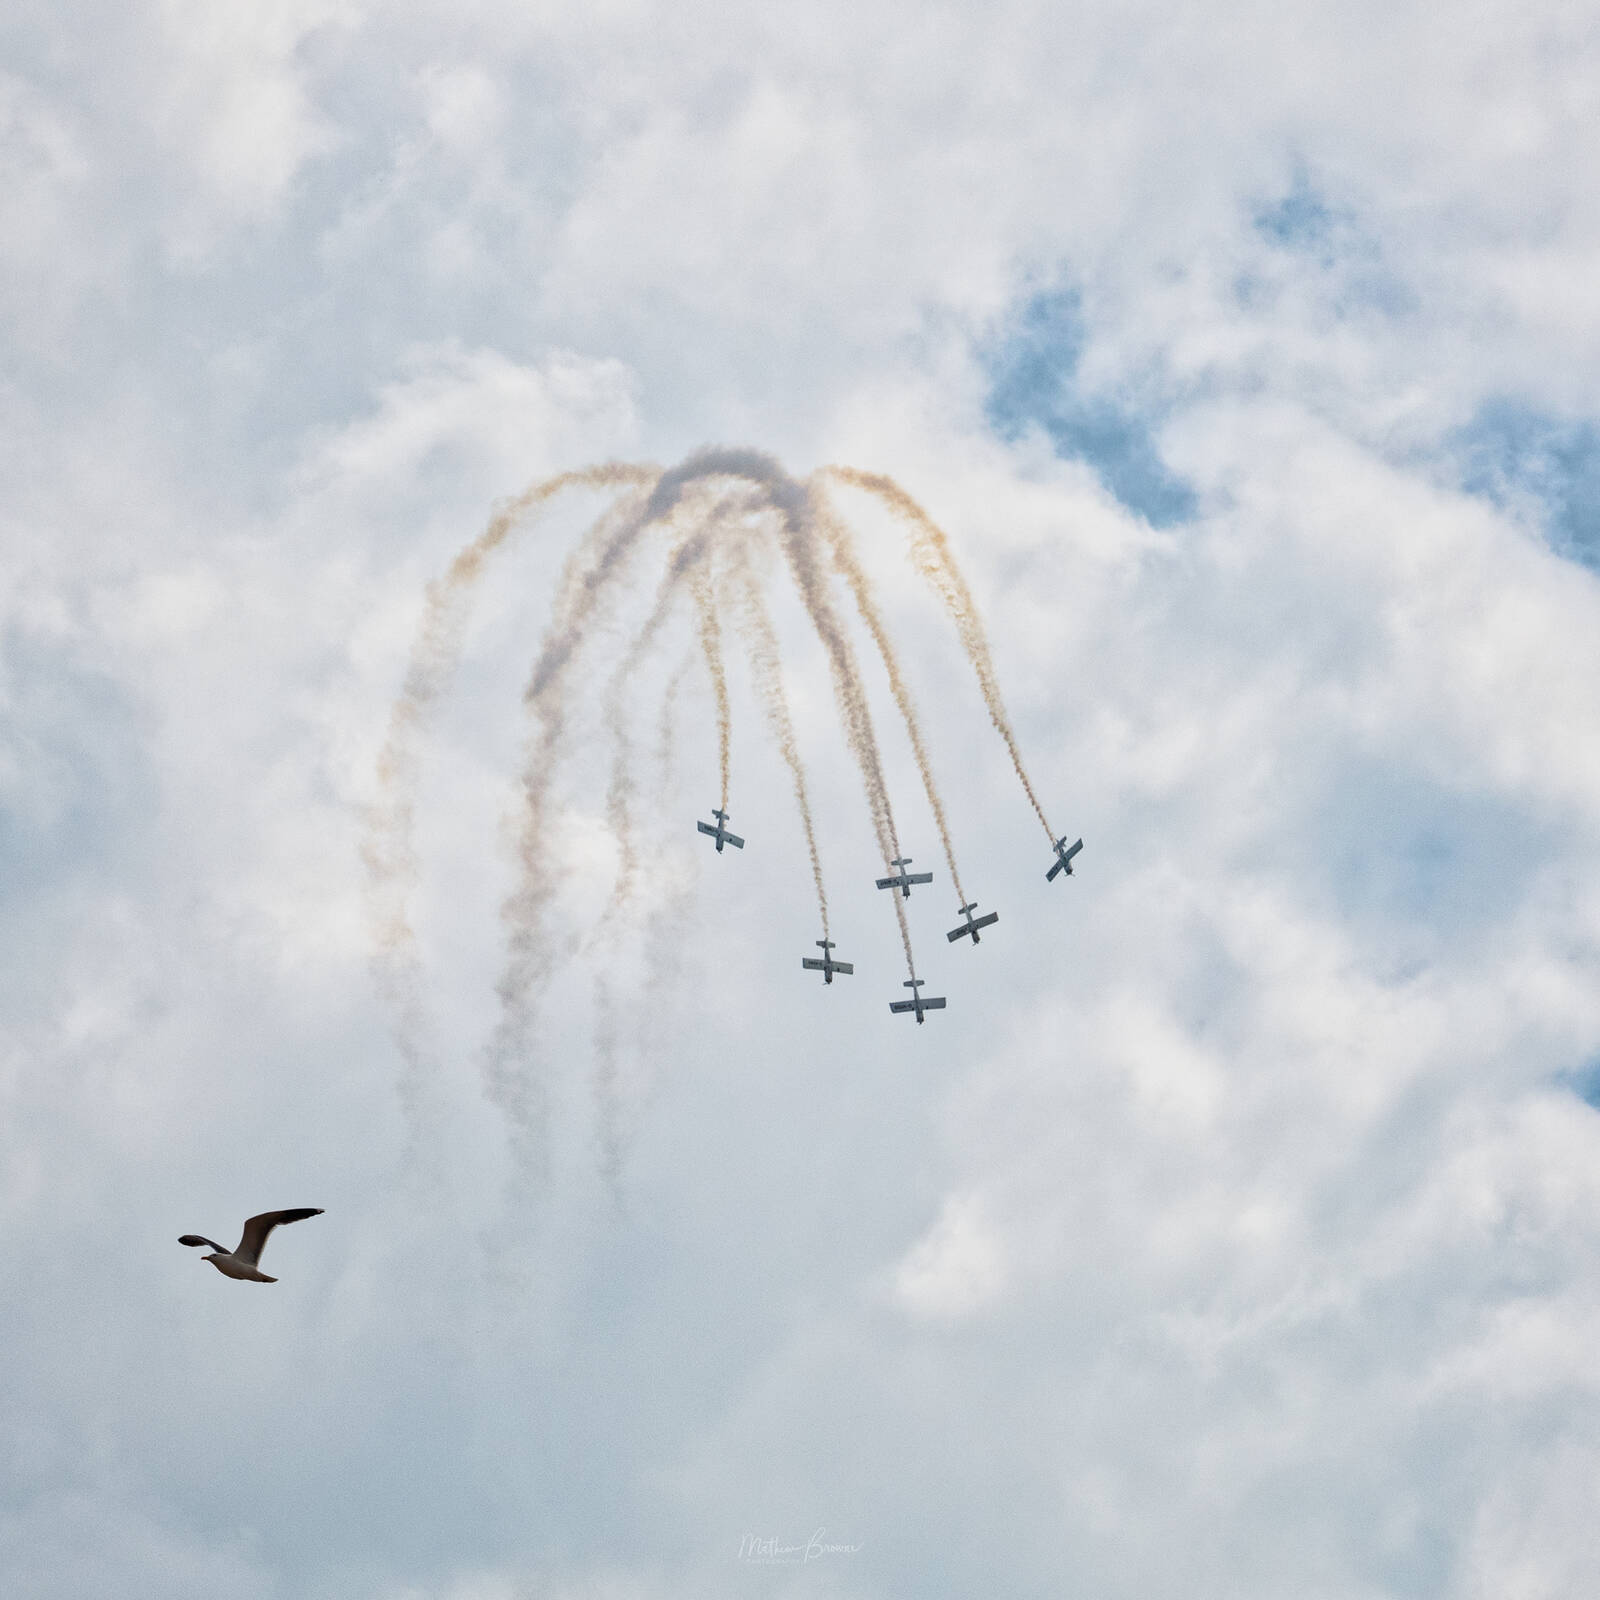 Image of Wales National Airshow by Mathew Browne